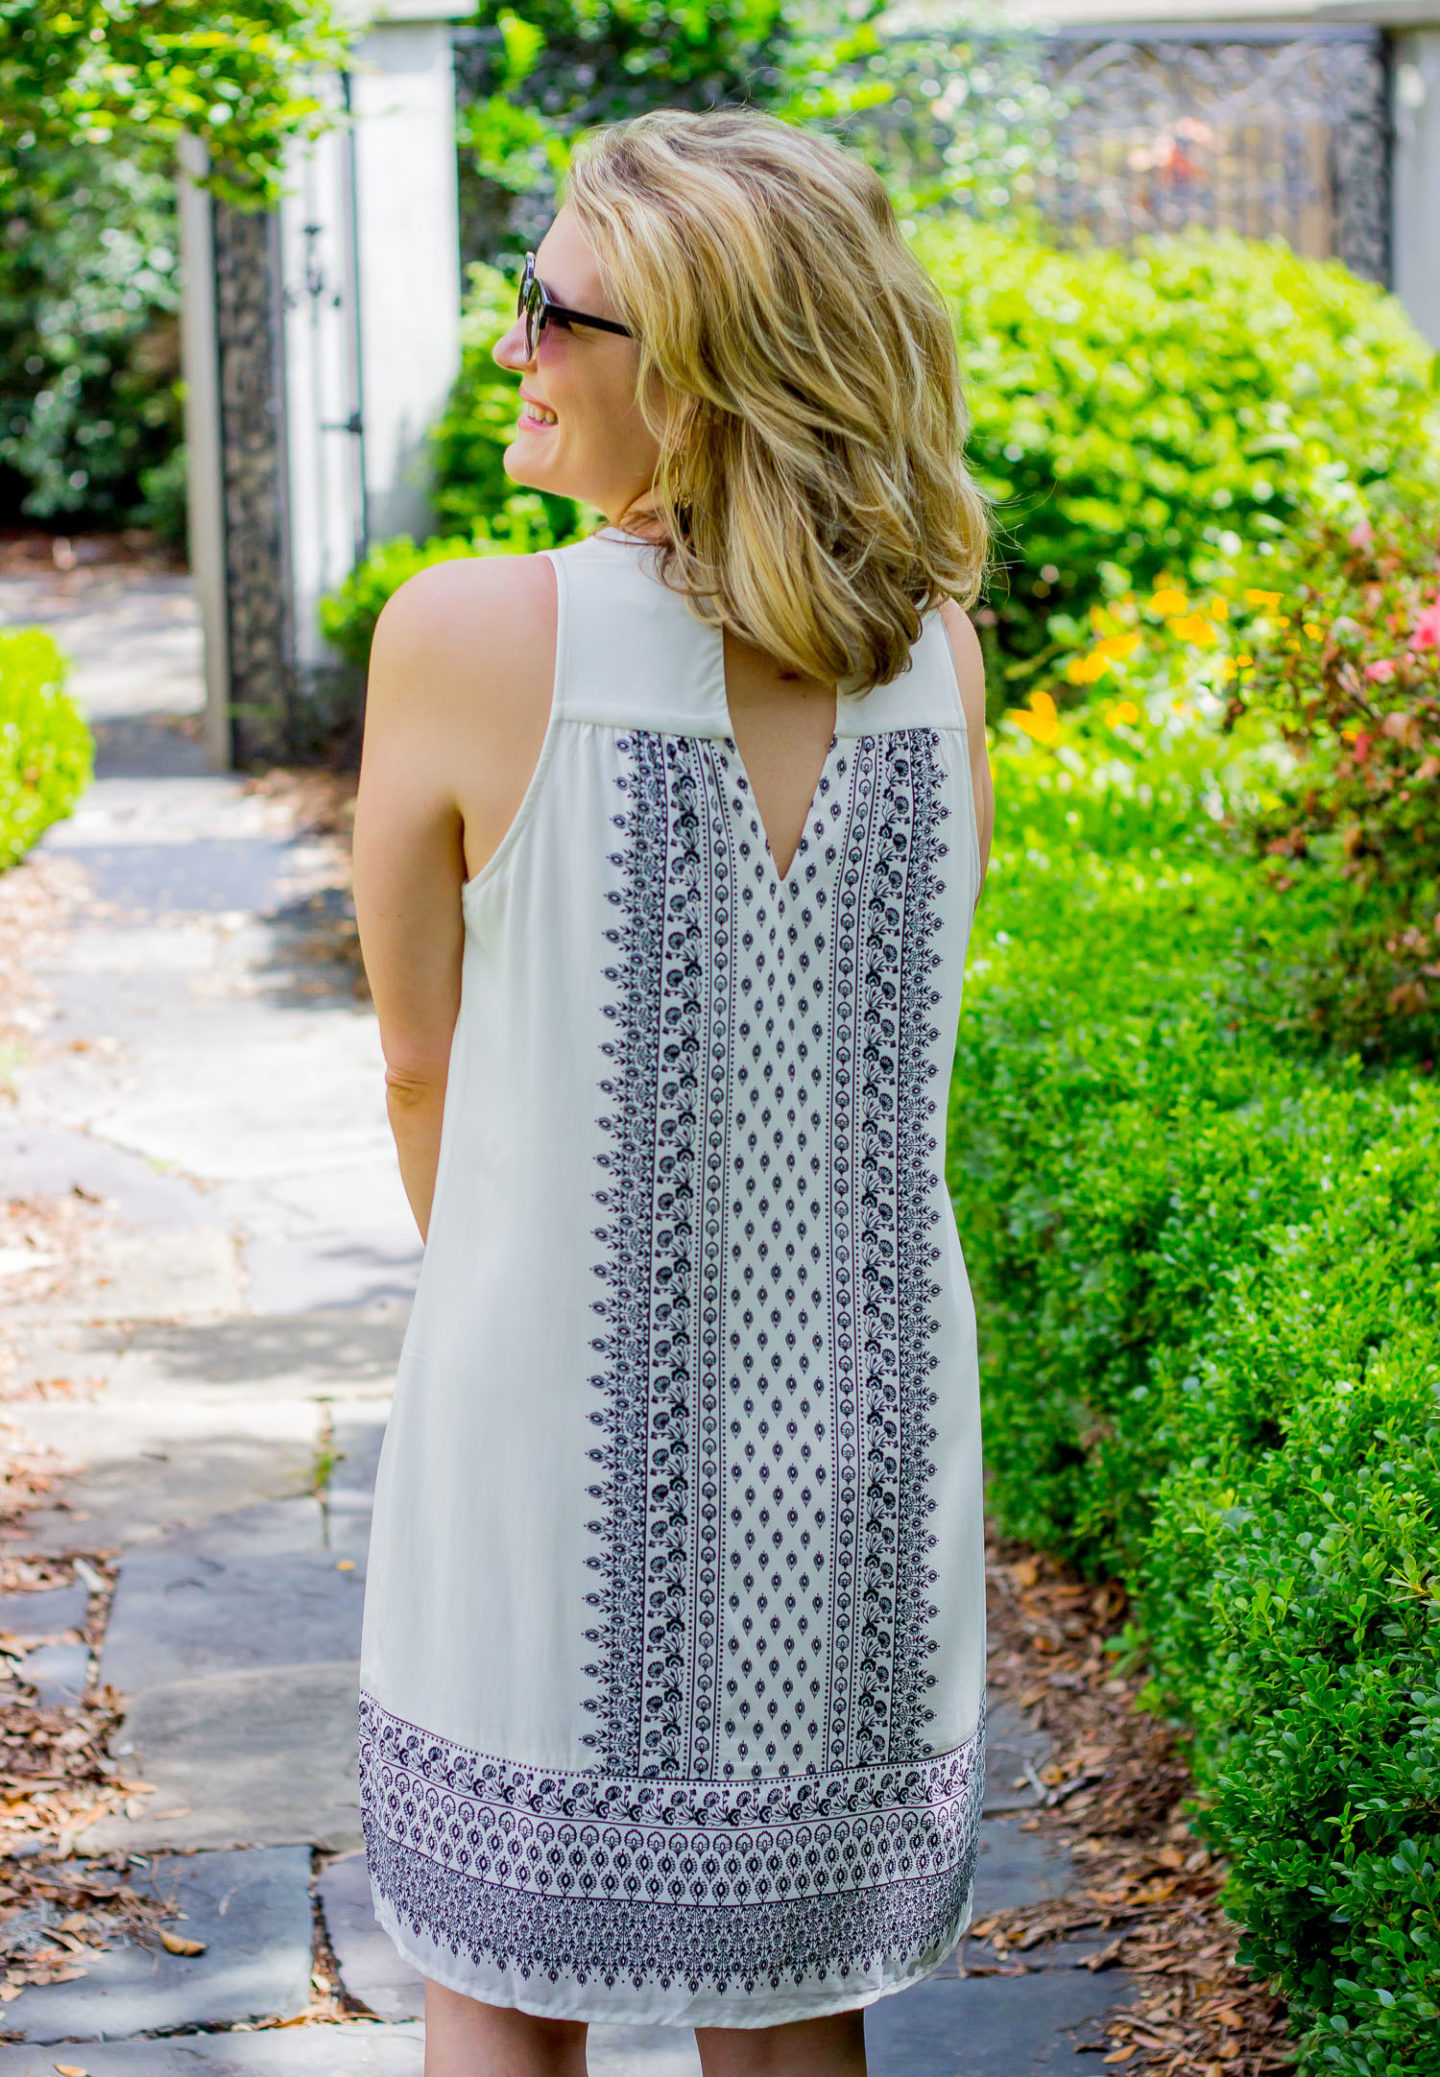 Summer white dress by Old Navy worn by Elise Giannasi of Belle Meets World blog